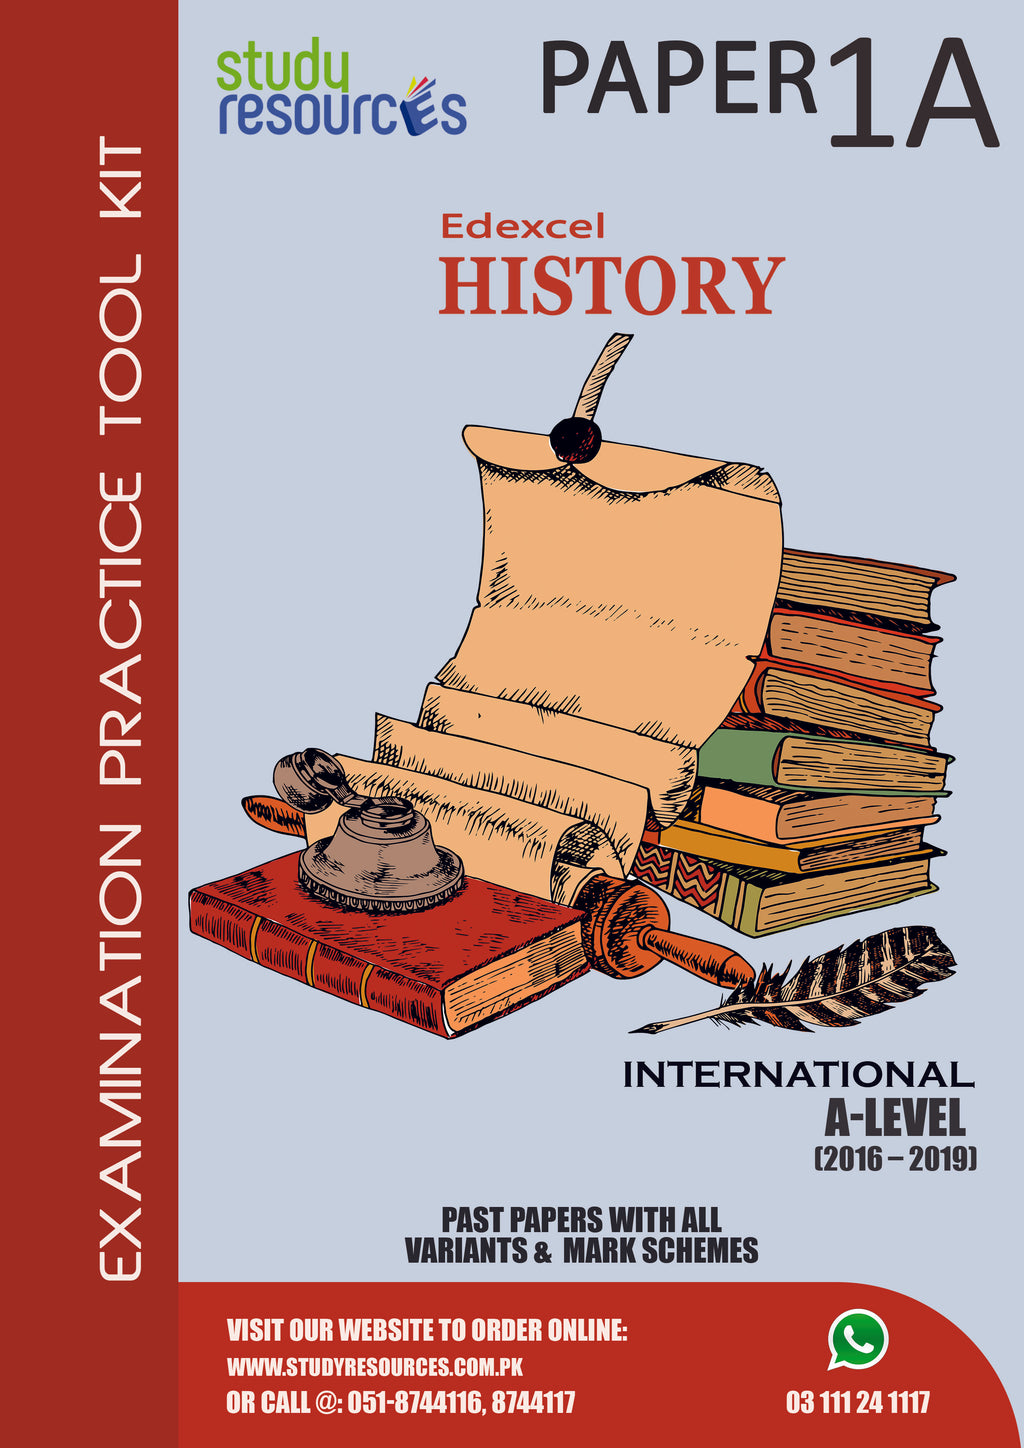 Edexcel A-Level History P-1A Past Papers (2016-2019)